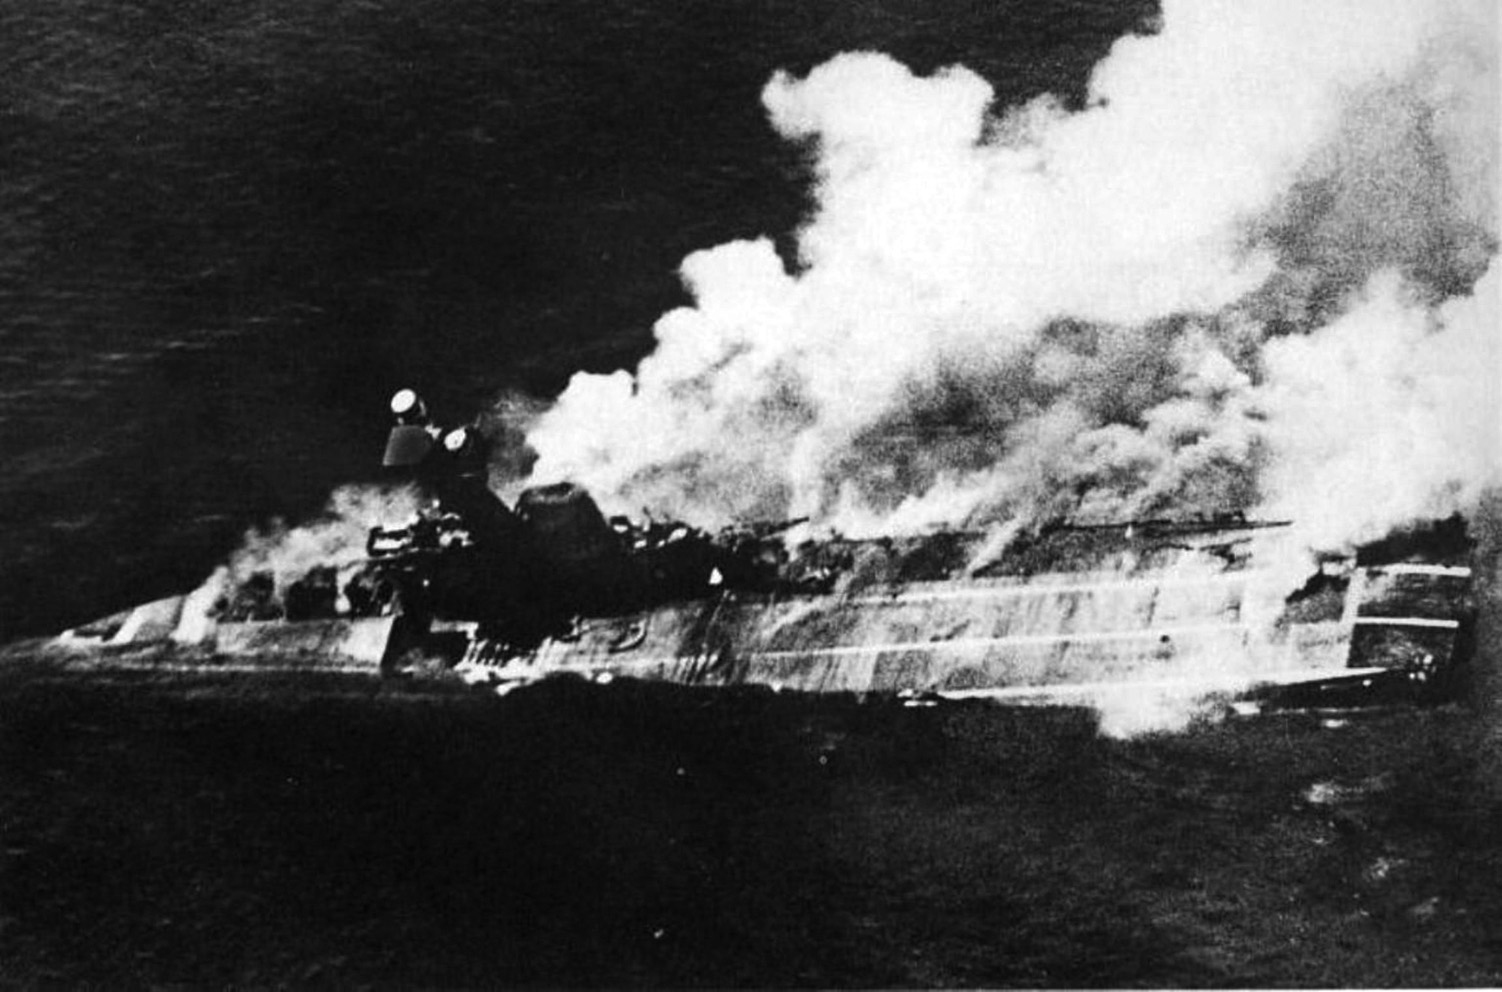 During the Japanese naval raids into the Indian Ocean in 1942, the British aircraft carrier Hermes was sunk. 